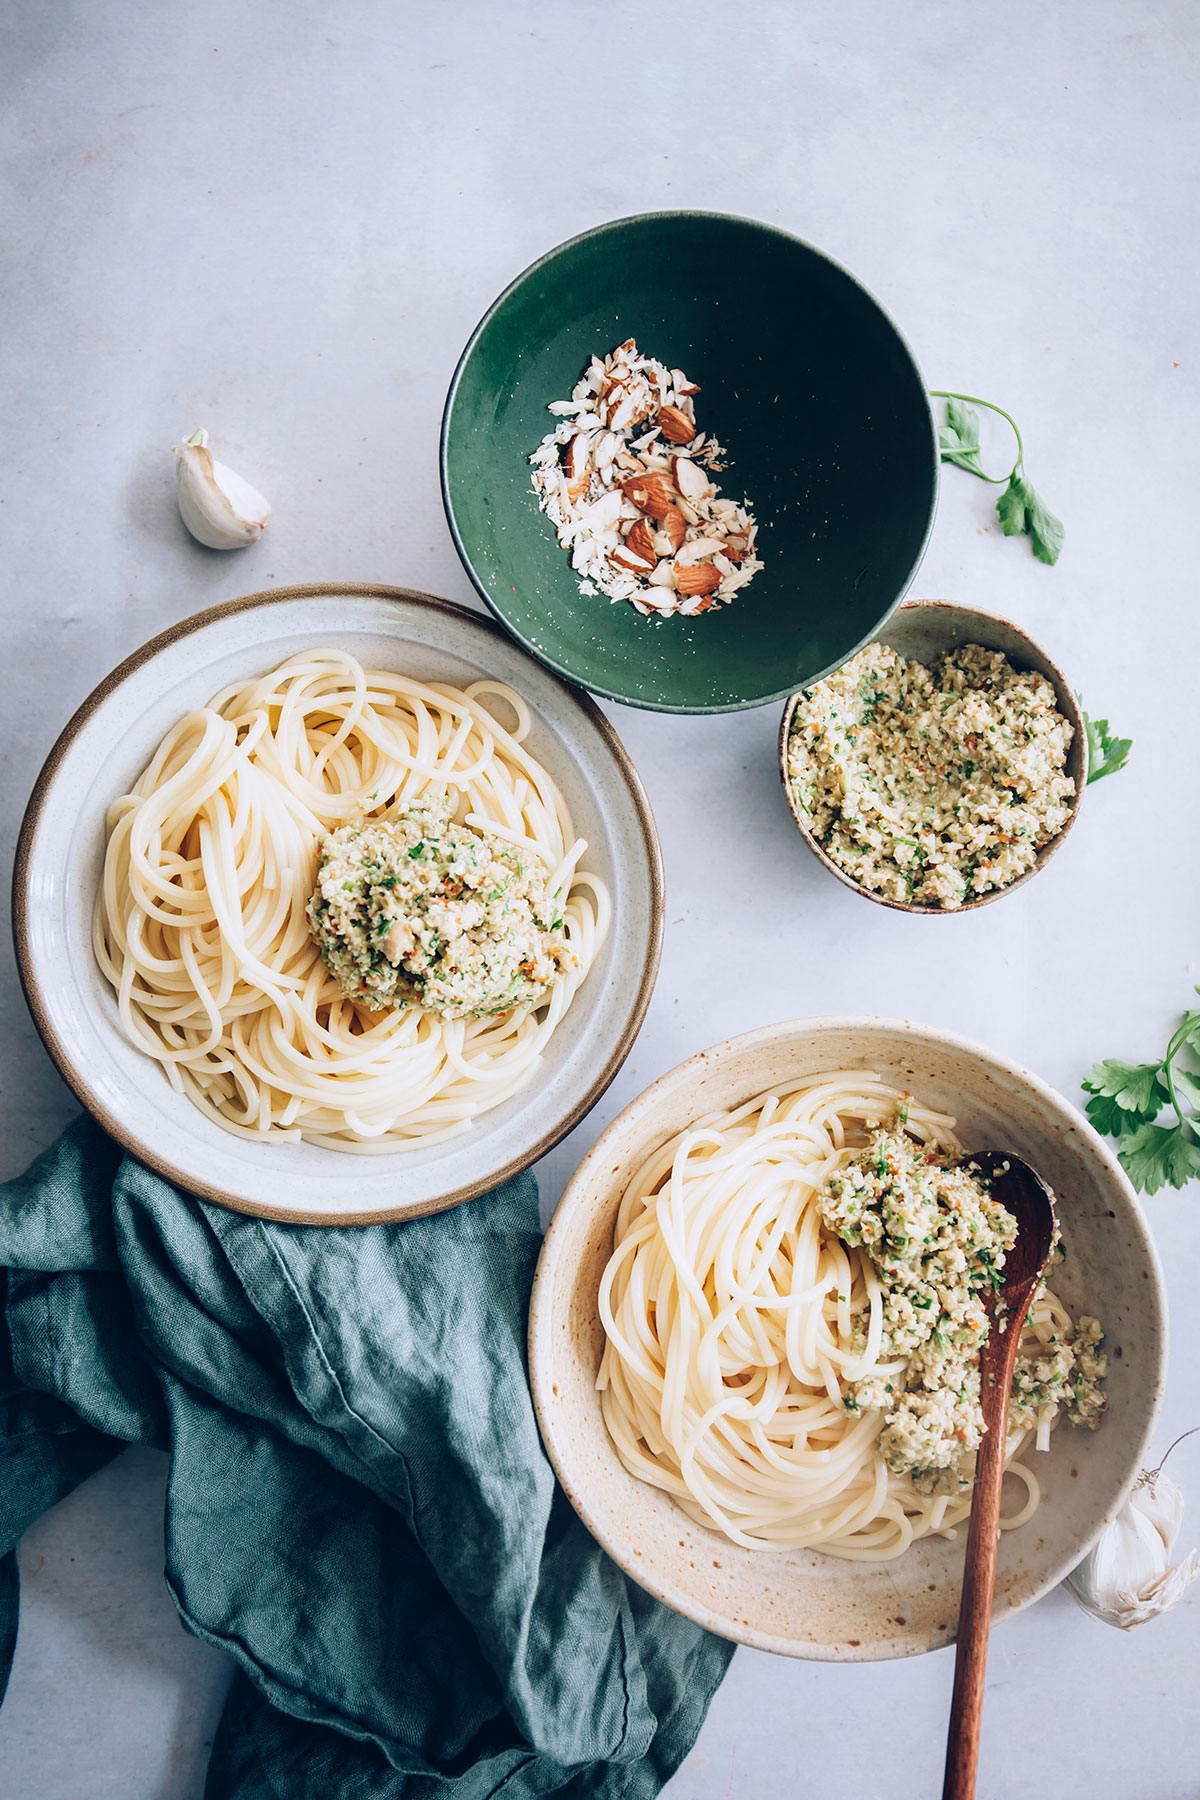 Spaghetti with Toasted Almond and Green Olive Pesto